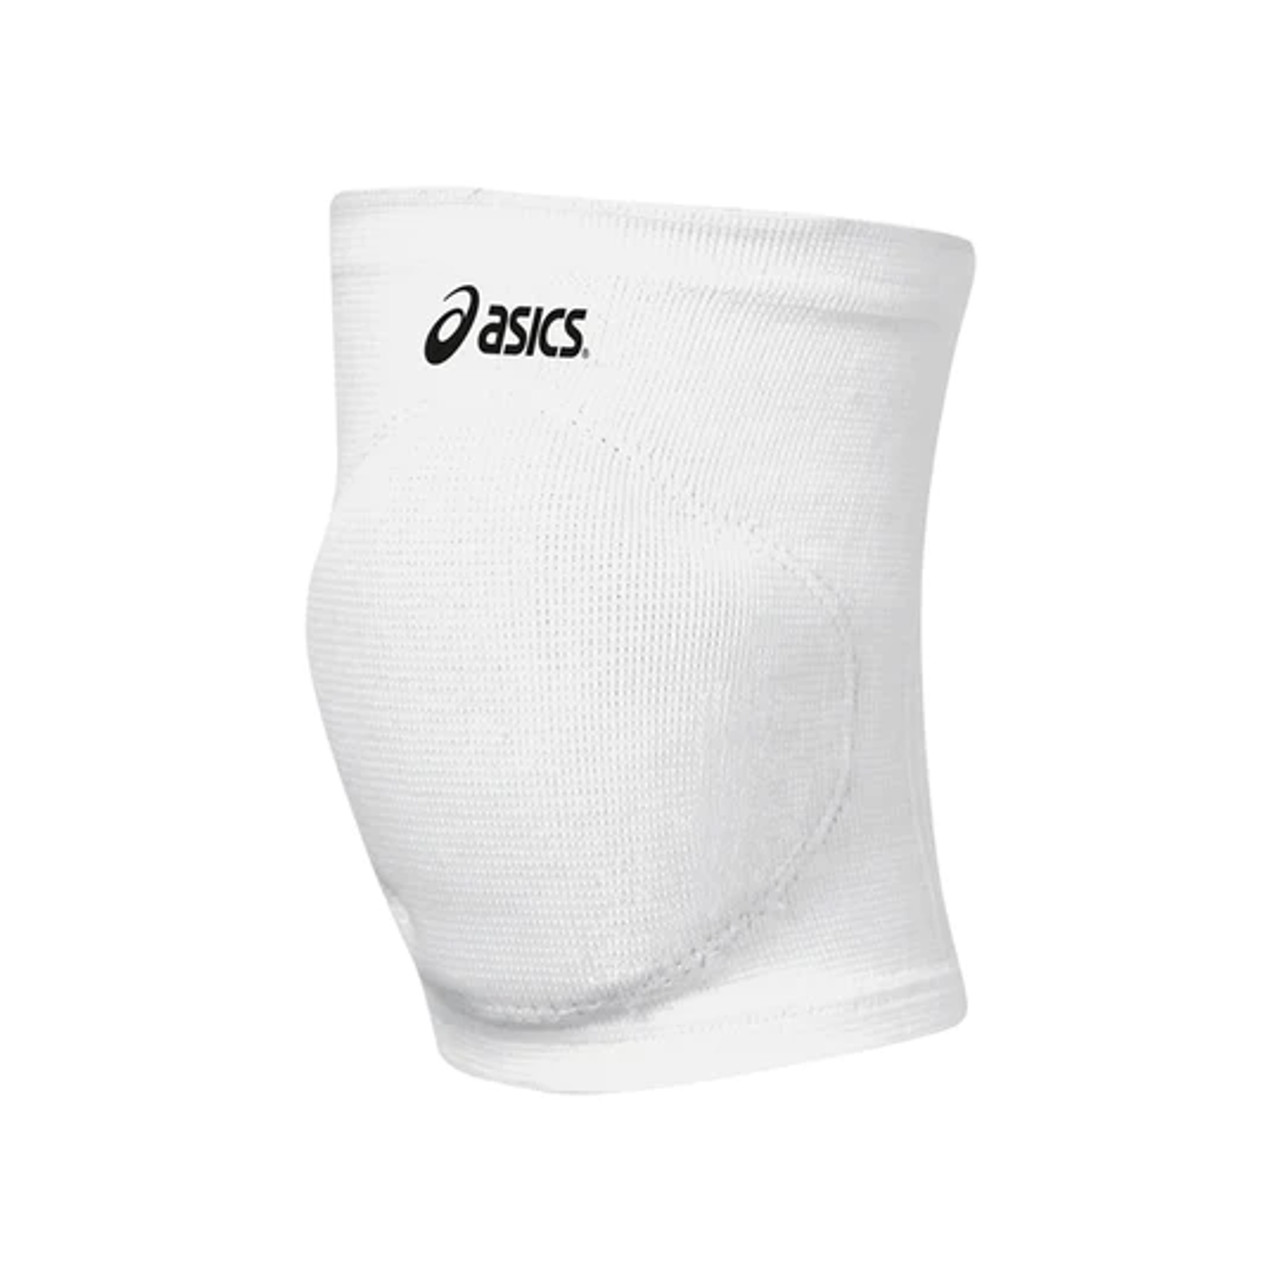 Asics Competition 3.0G Knee Pads